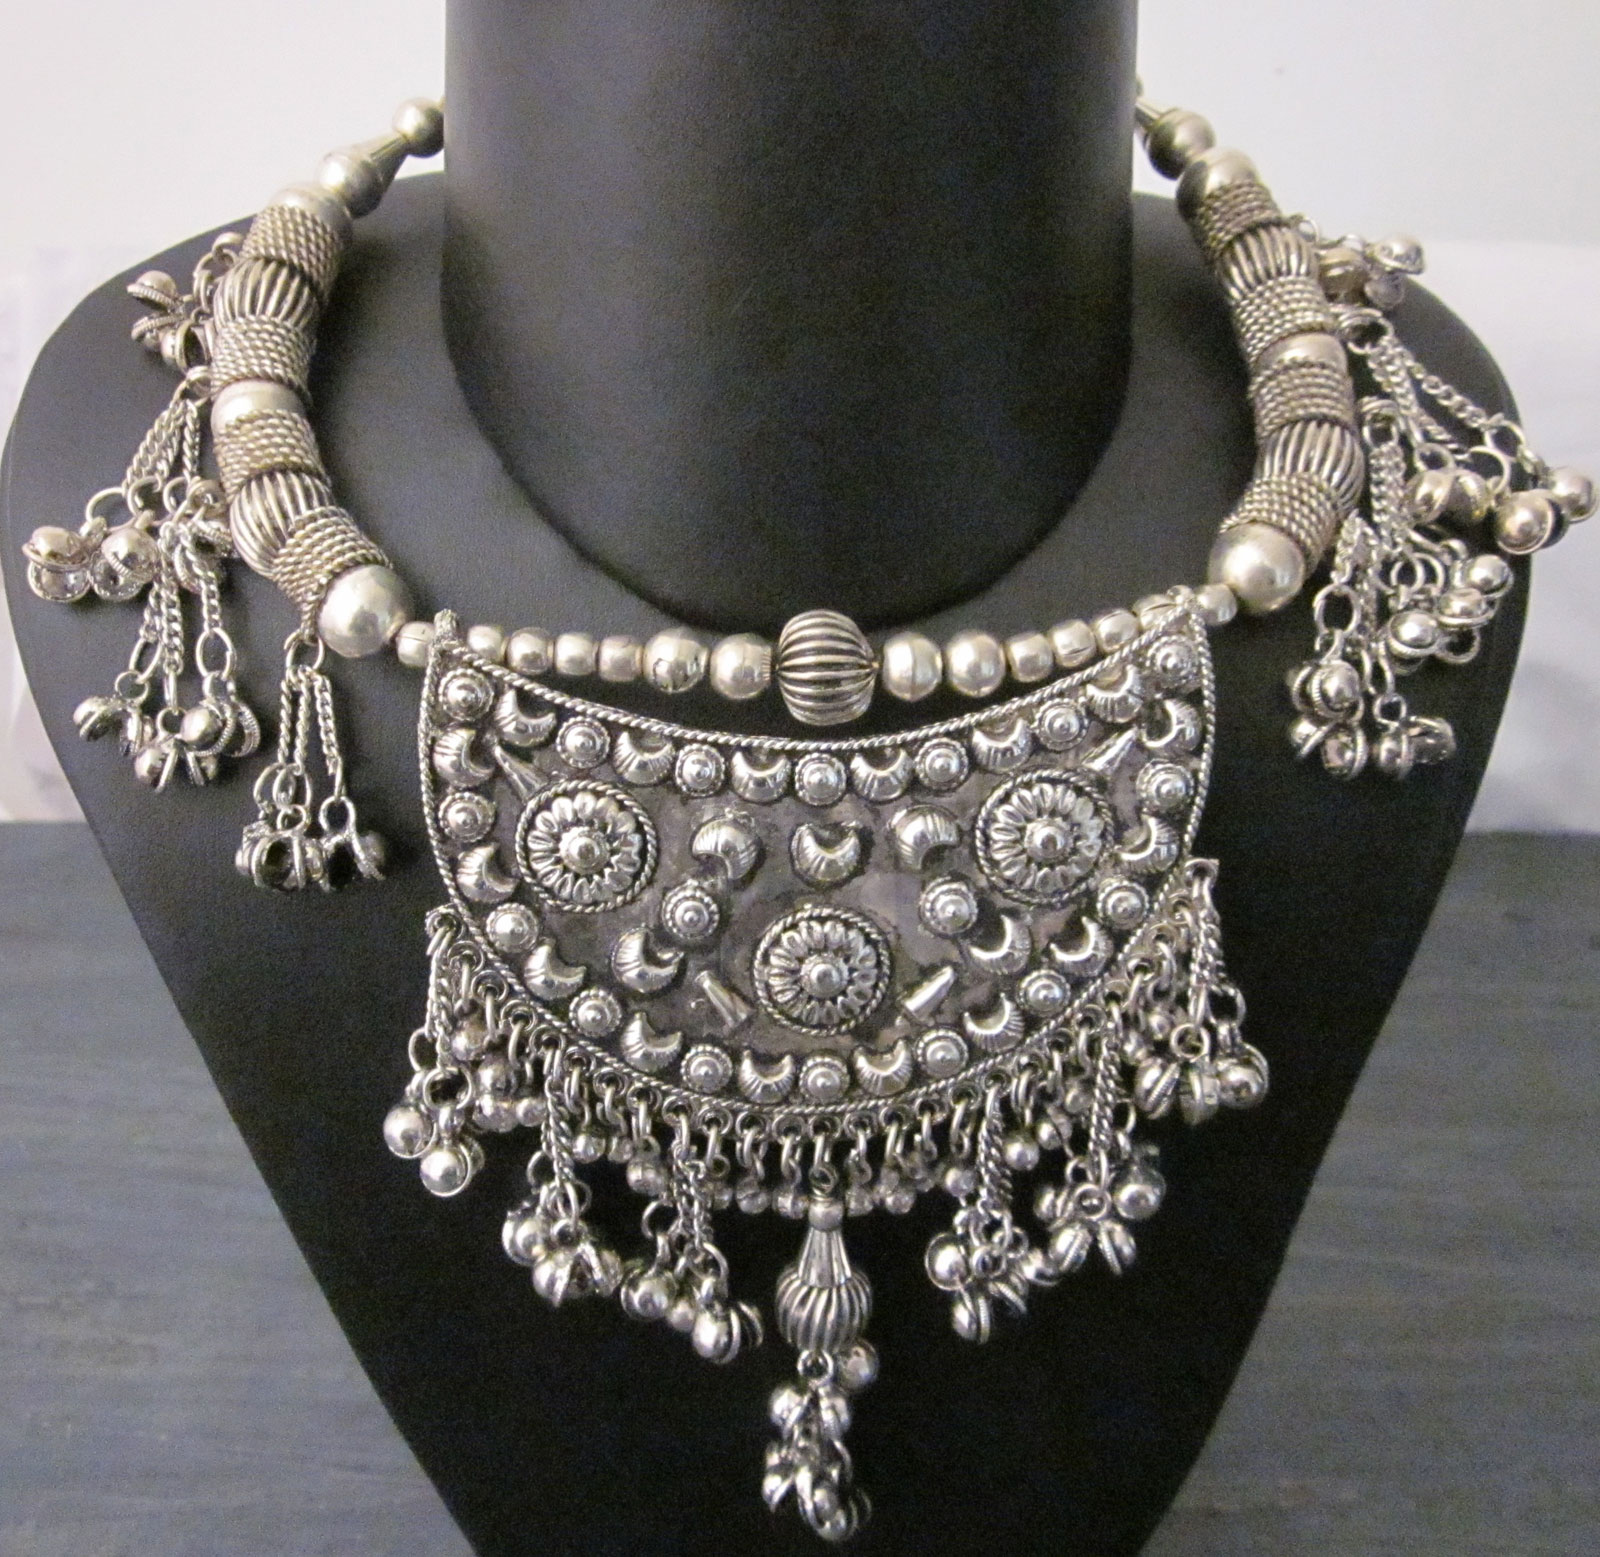 TRIBAL BELLY DANCE NEW! NECKLACE SILVER COIN & MIRROR MEDALLION CHOKER 